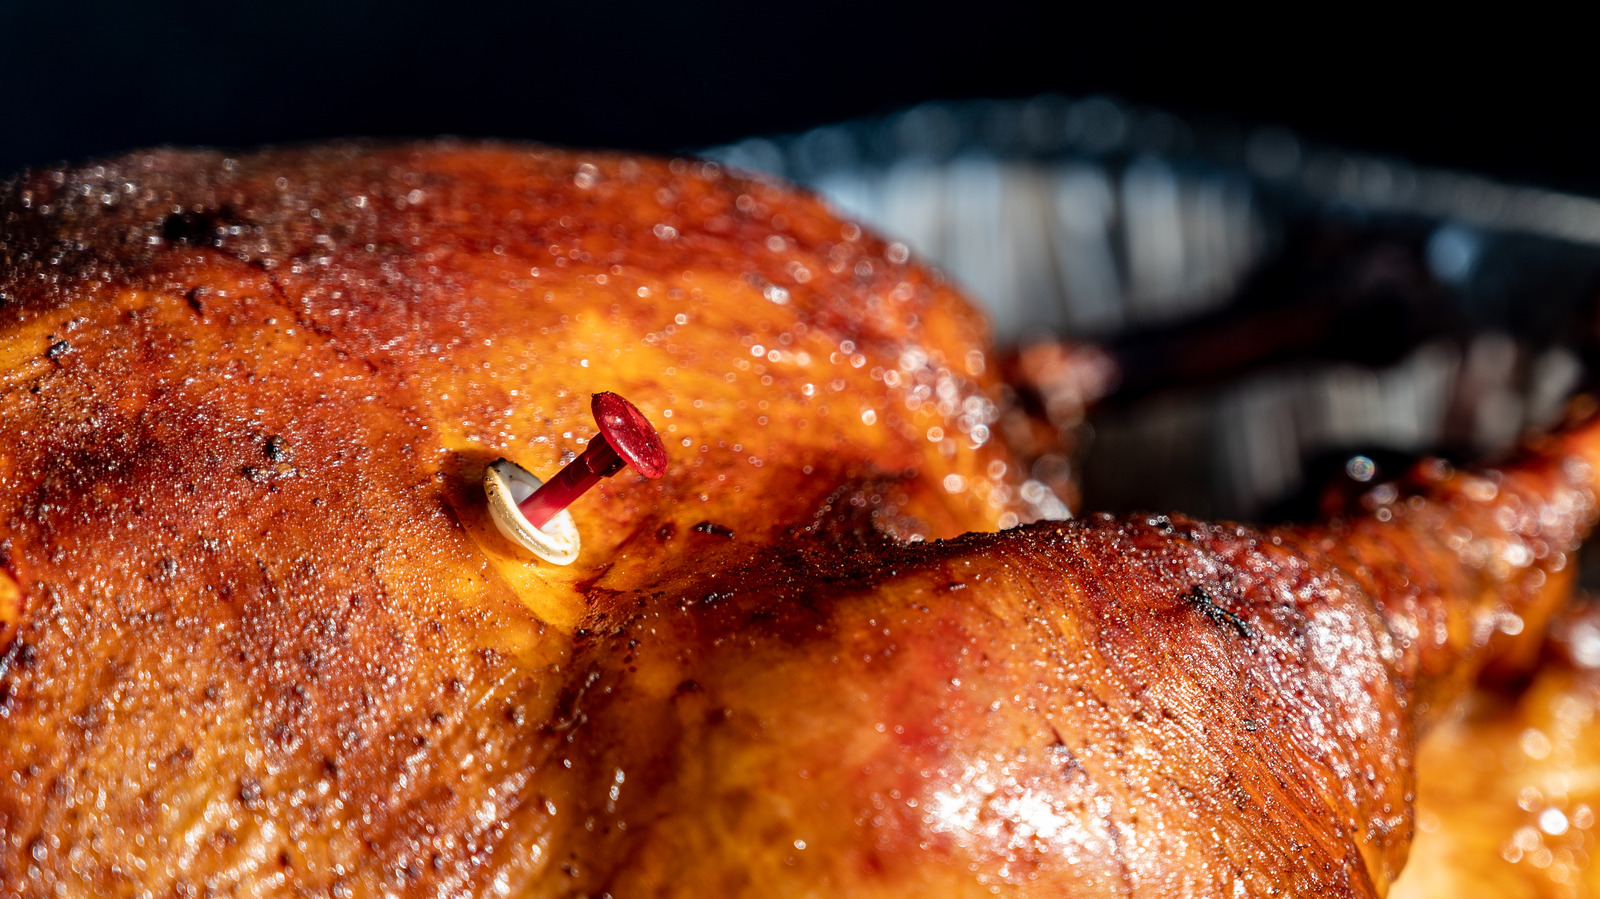 https://www.tastingtable.com/img/gallery/why-you-shouldnt-trust-the-pop-up-timer-in-your-thanksgiving-turkey/l-intro-1667663642.jpg